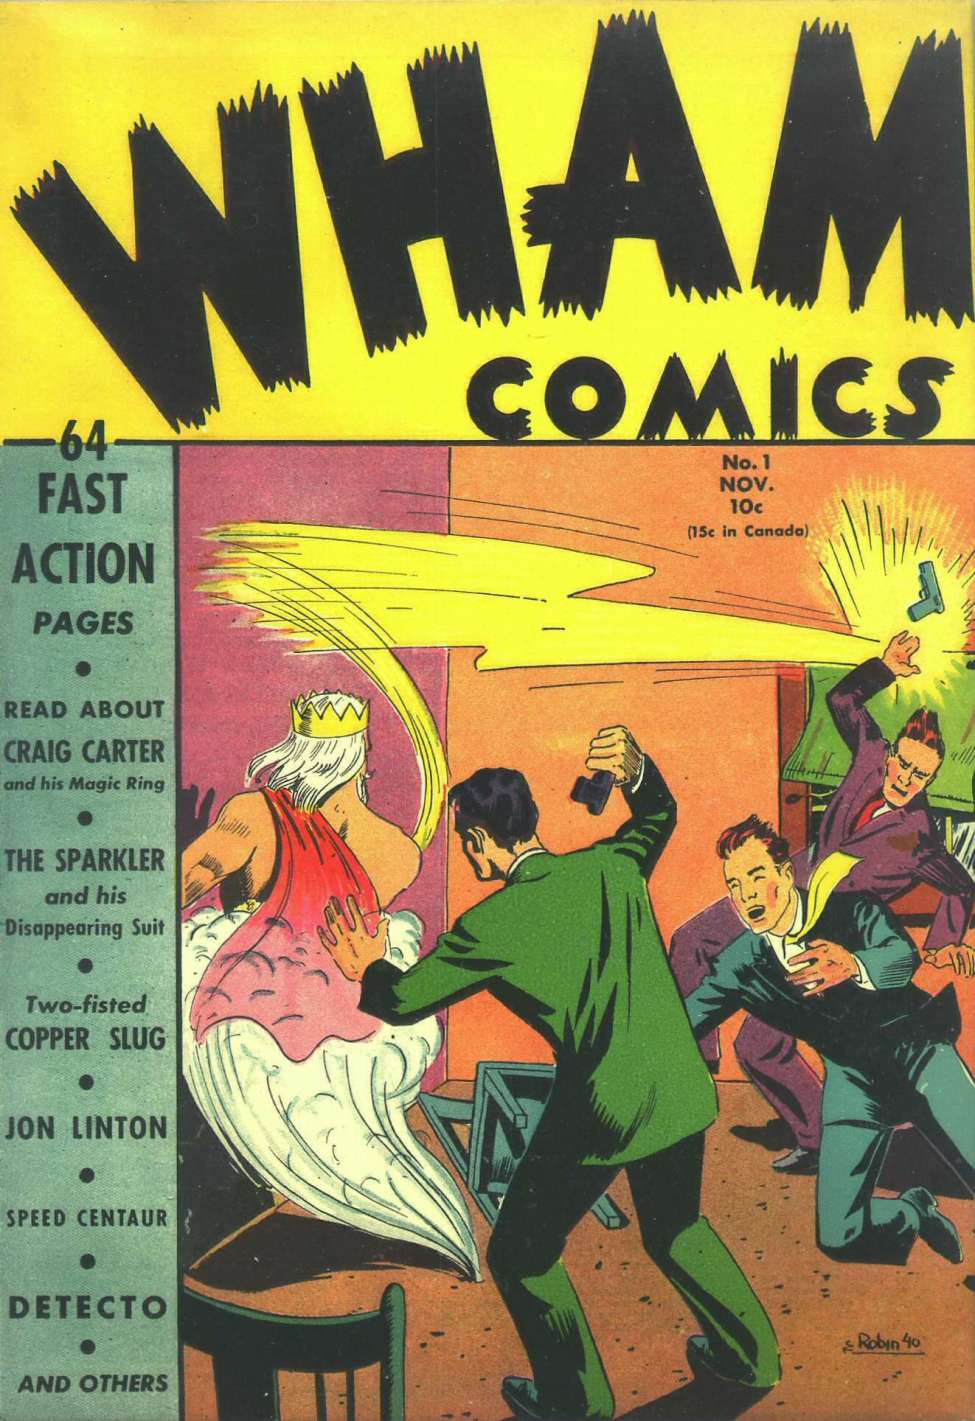 Book Cover For Wham Comics 1 - Version 2